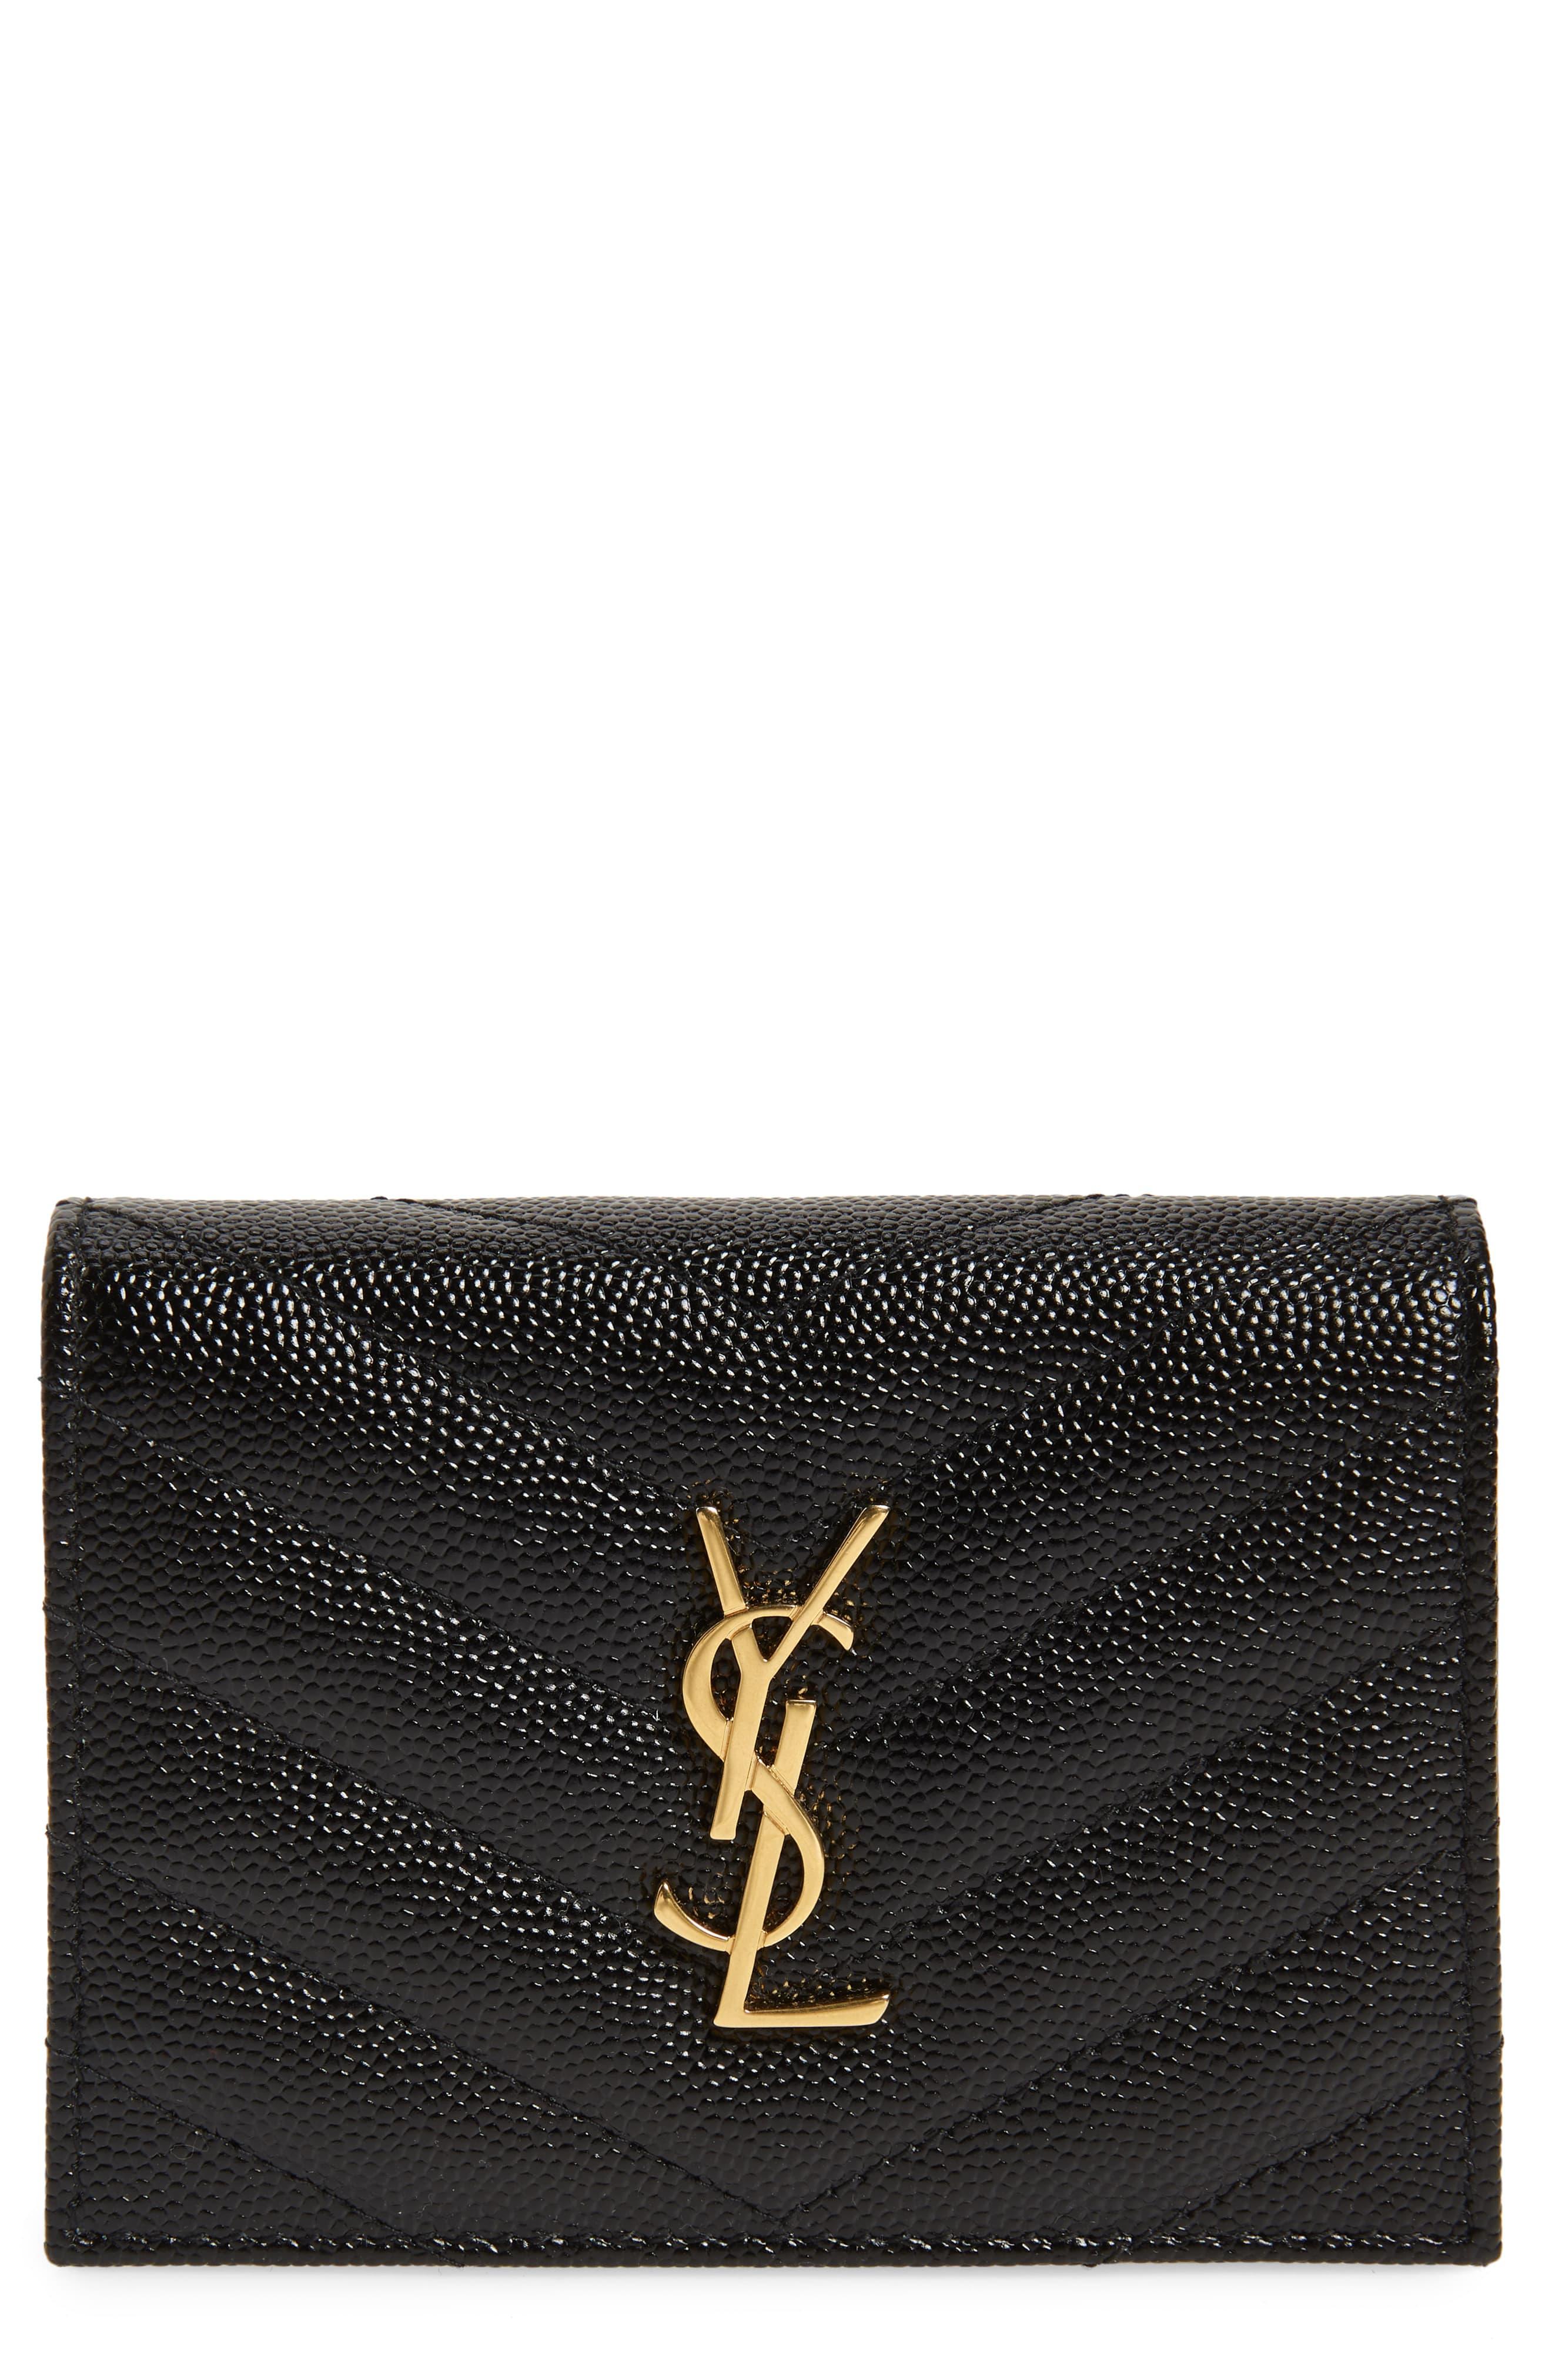 Saint Laurent Monogram Quilted Leather Leather Flap Card Case in Black